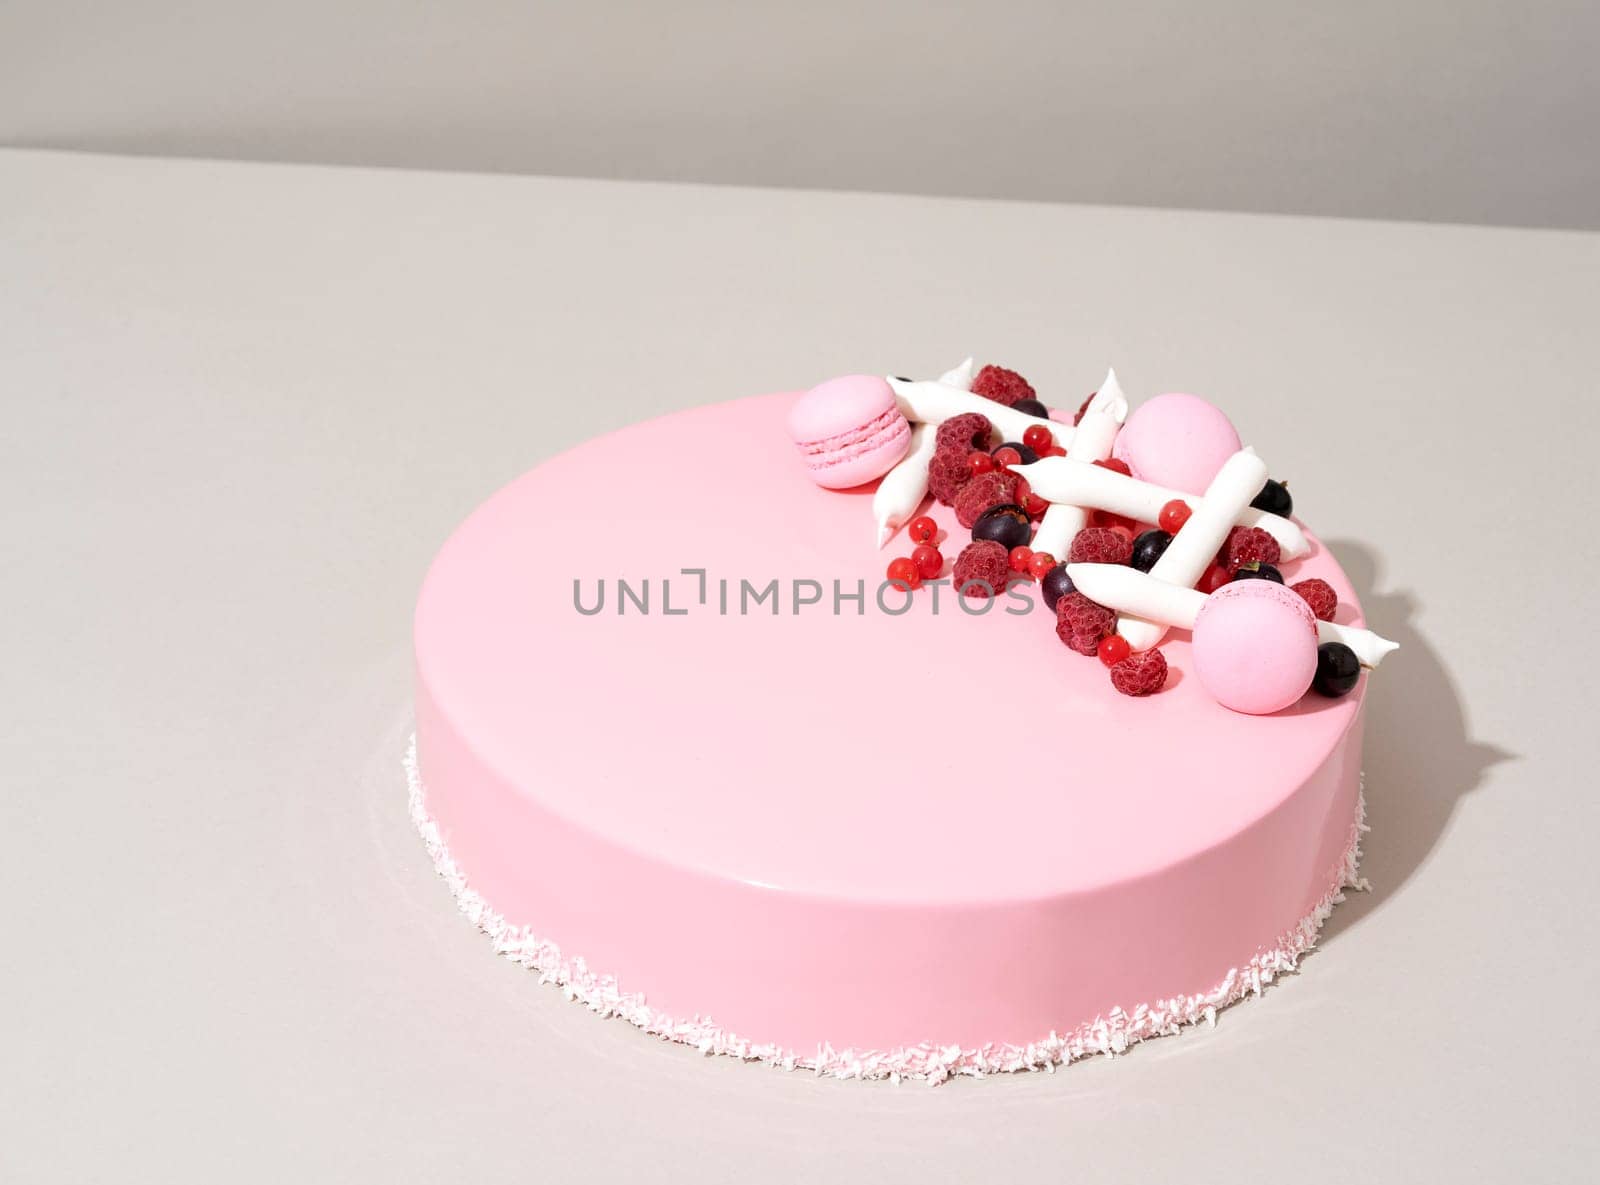 An appetizing pink cake with white strawberries adorning the top sits invitingly on a table by A_Karim